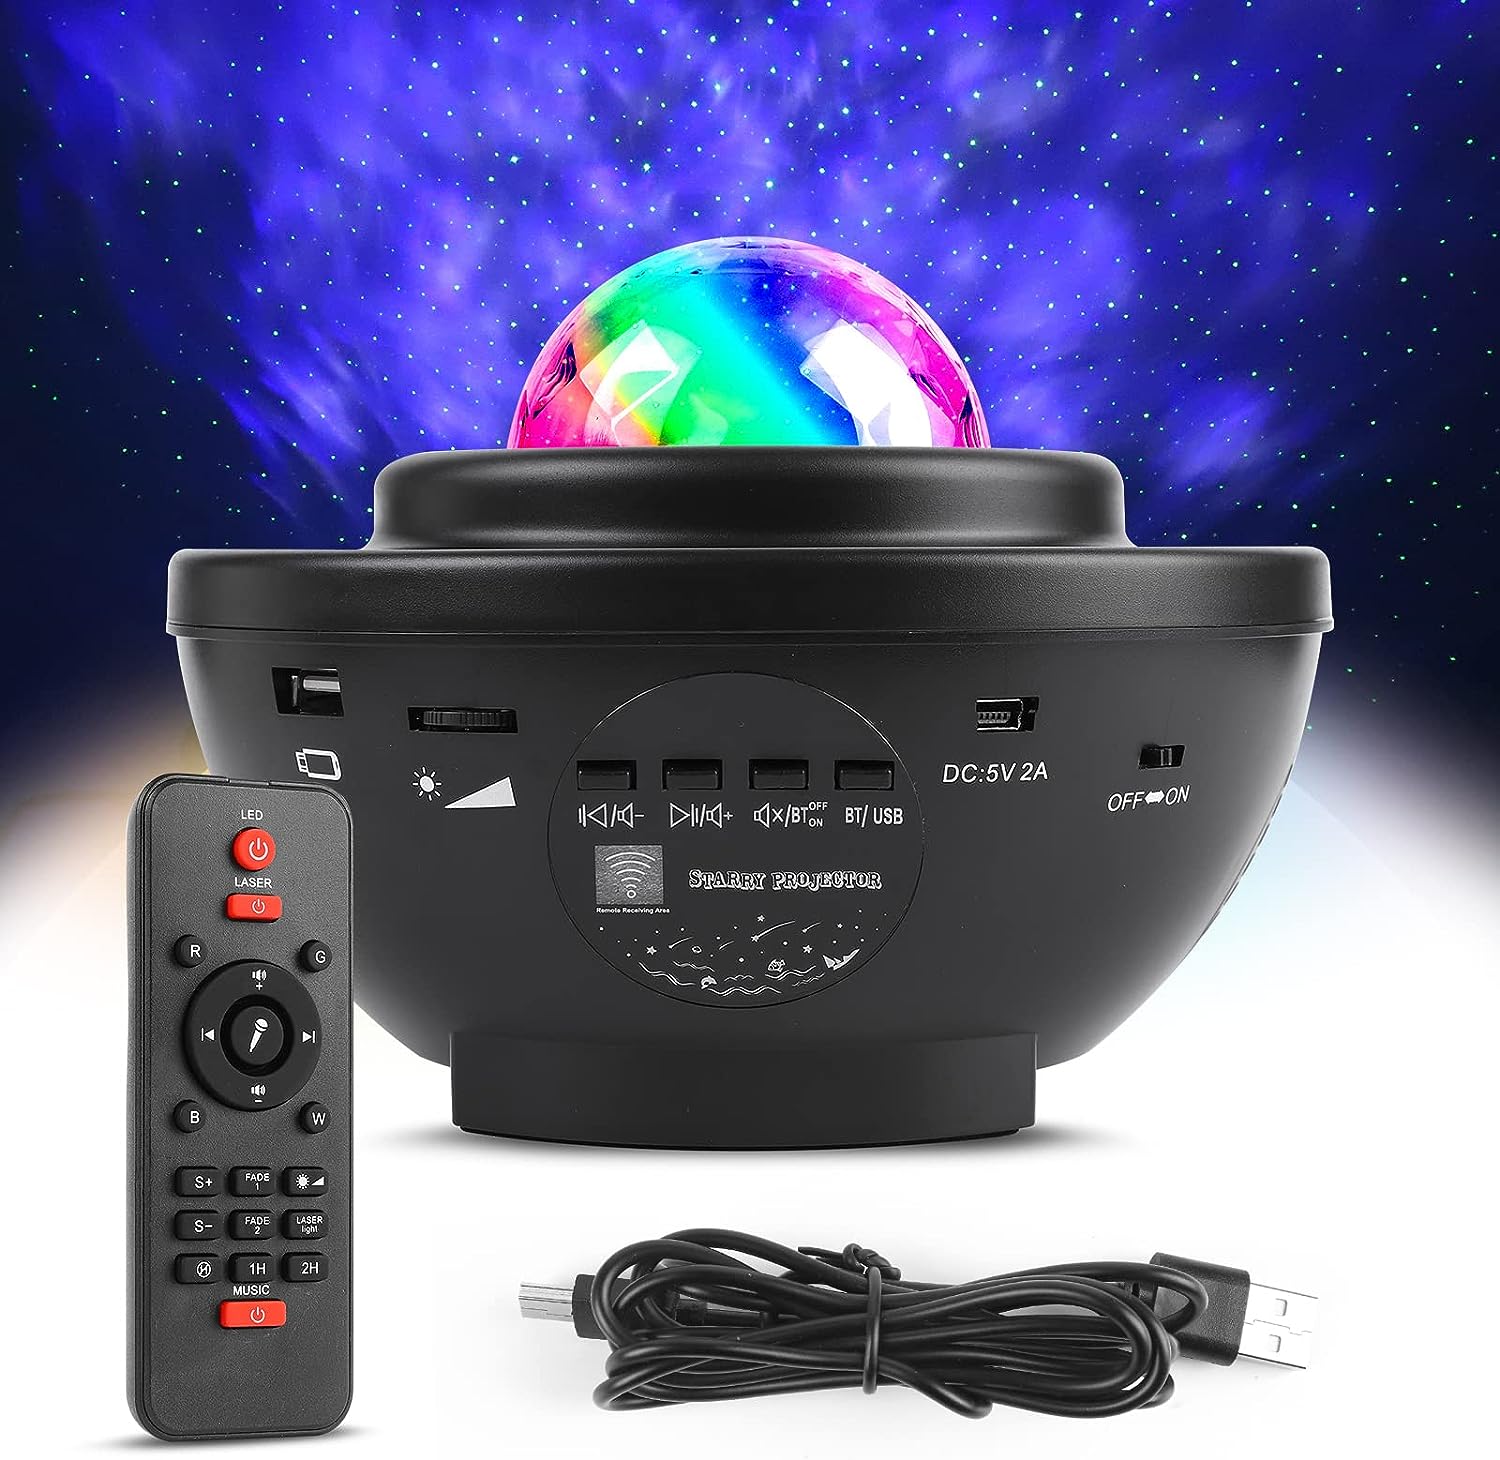 LED Star Light Projector, Starry Night Lights & Rotating Ocean Wave Music Projection Lamp with Remote Control Bluetooth Speaker for Kids Room Bedroom,Living Room Decoration